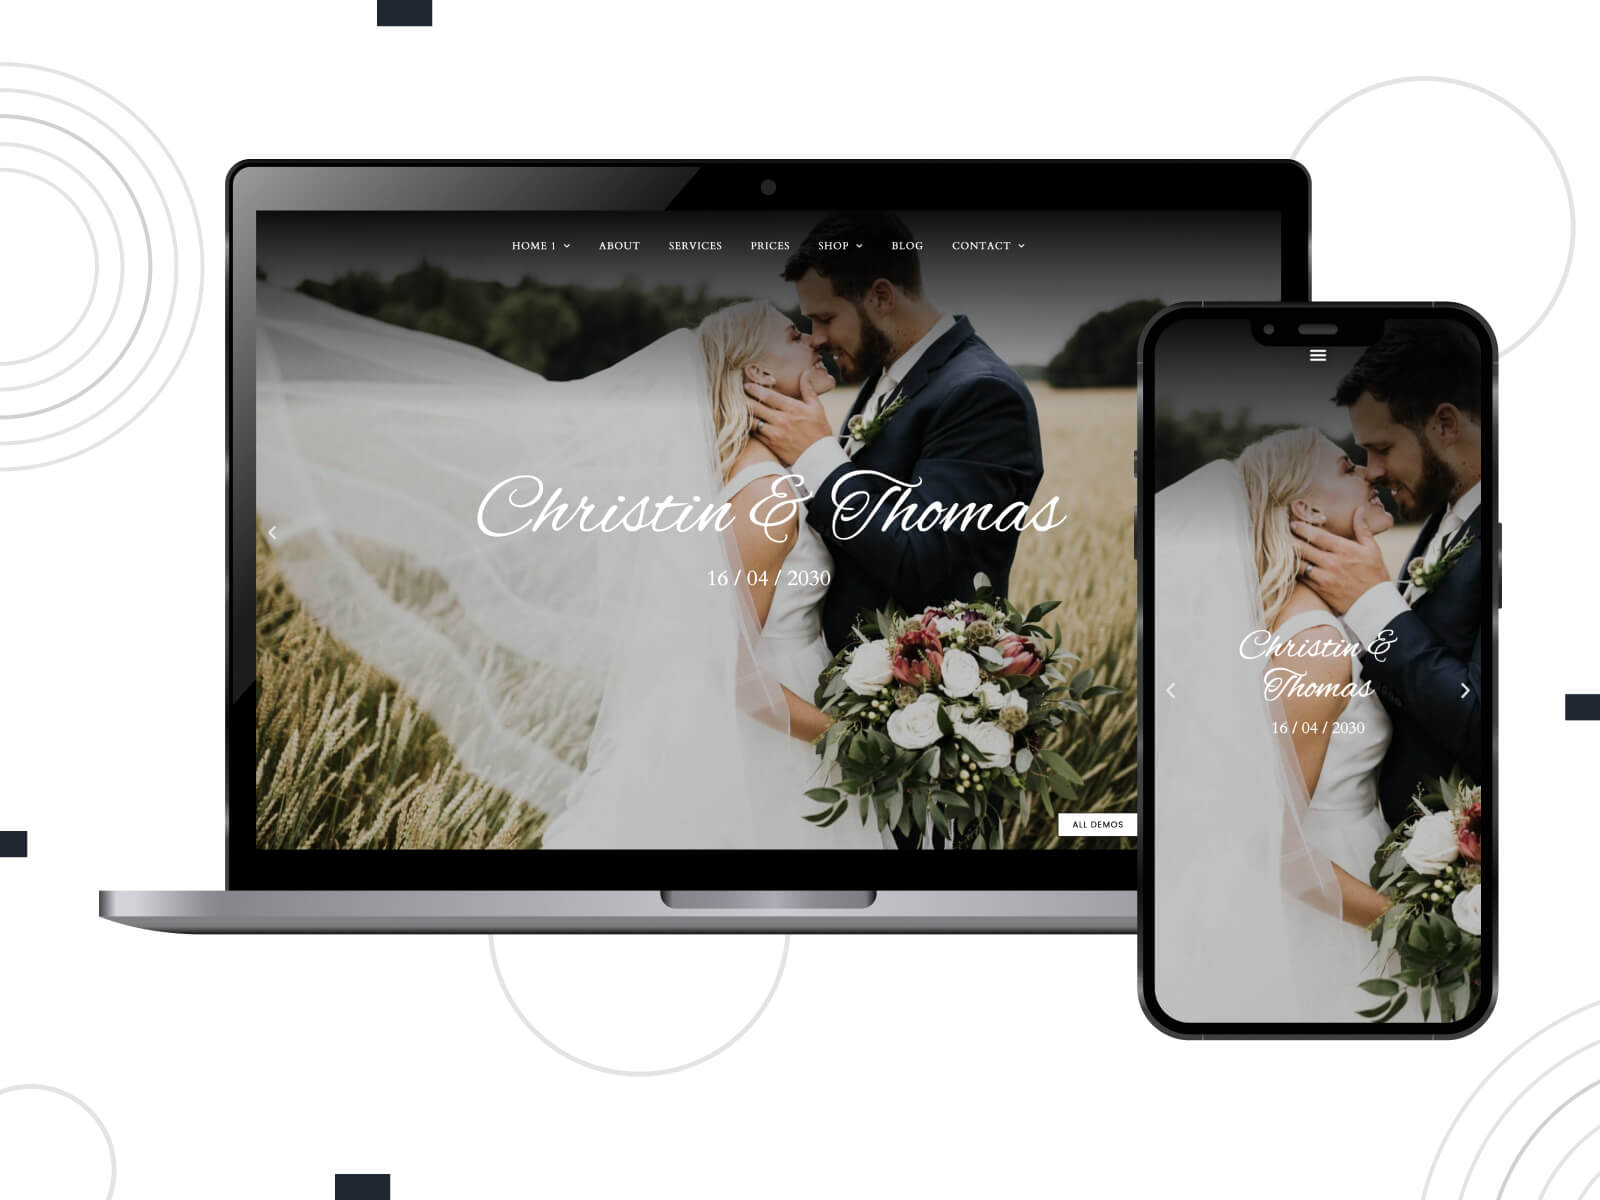 Snapshot of Wedding Theme - dark, rich, WordPress themes focusing on wedding venues, with detailed galleries and information in dark slate gray, gray, and dark olive green color scheme.